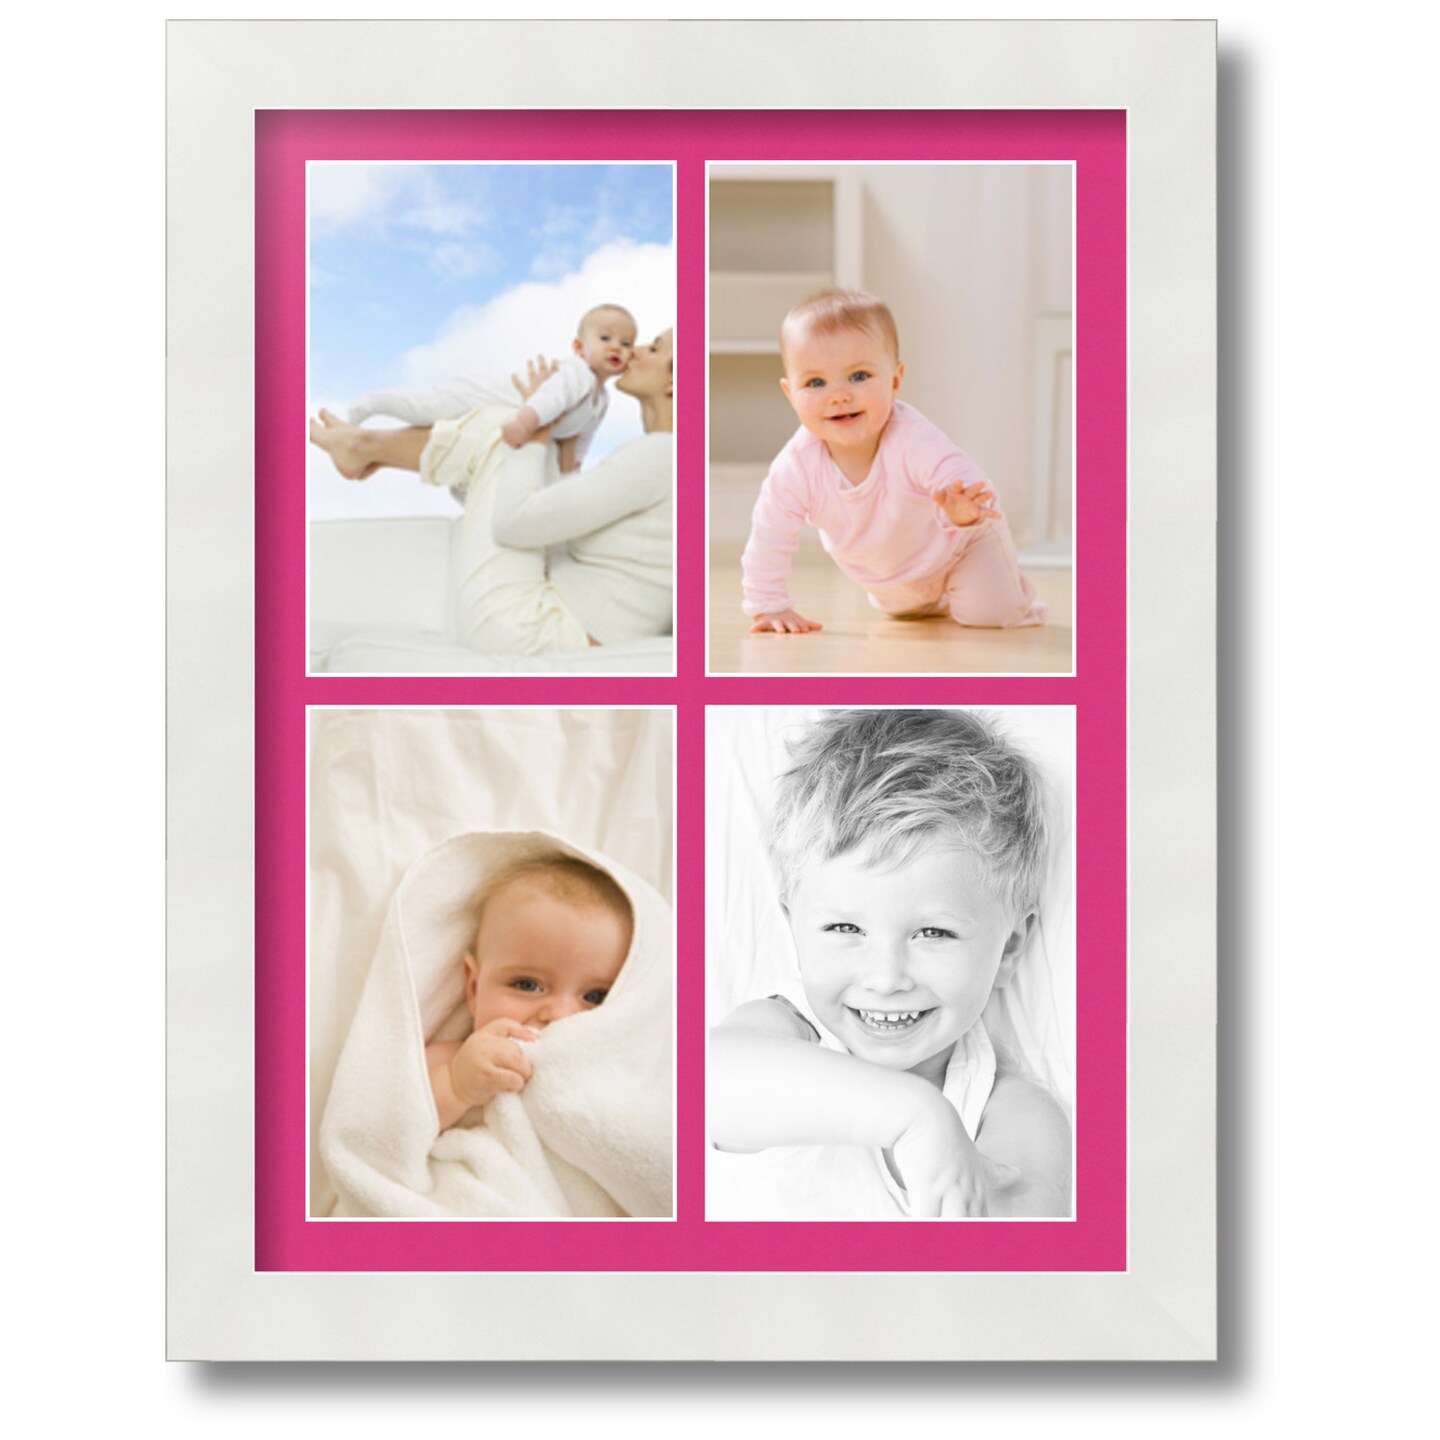 ArtToFrames Collage Photo Picture Frame with 4 - 5x7 inch Openings, Framed in White with Over 62 Mat Color Options and Regular Glass (CSM-3966-2153)